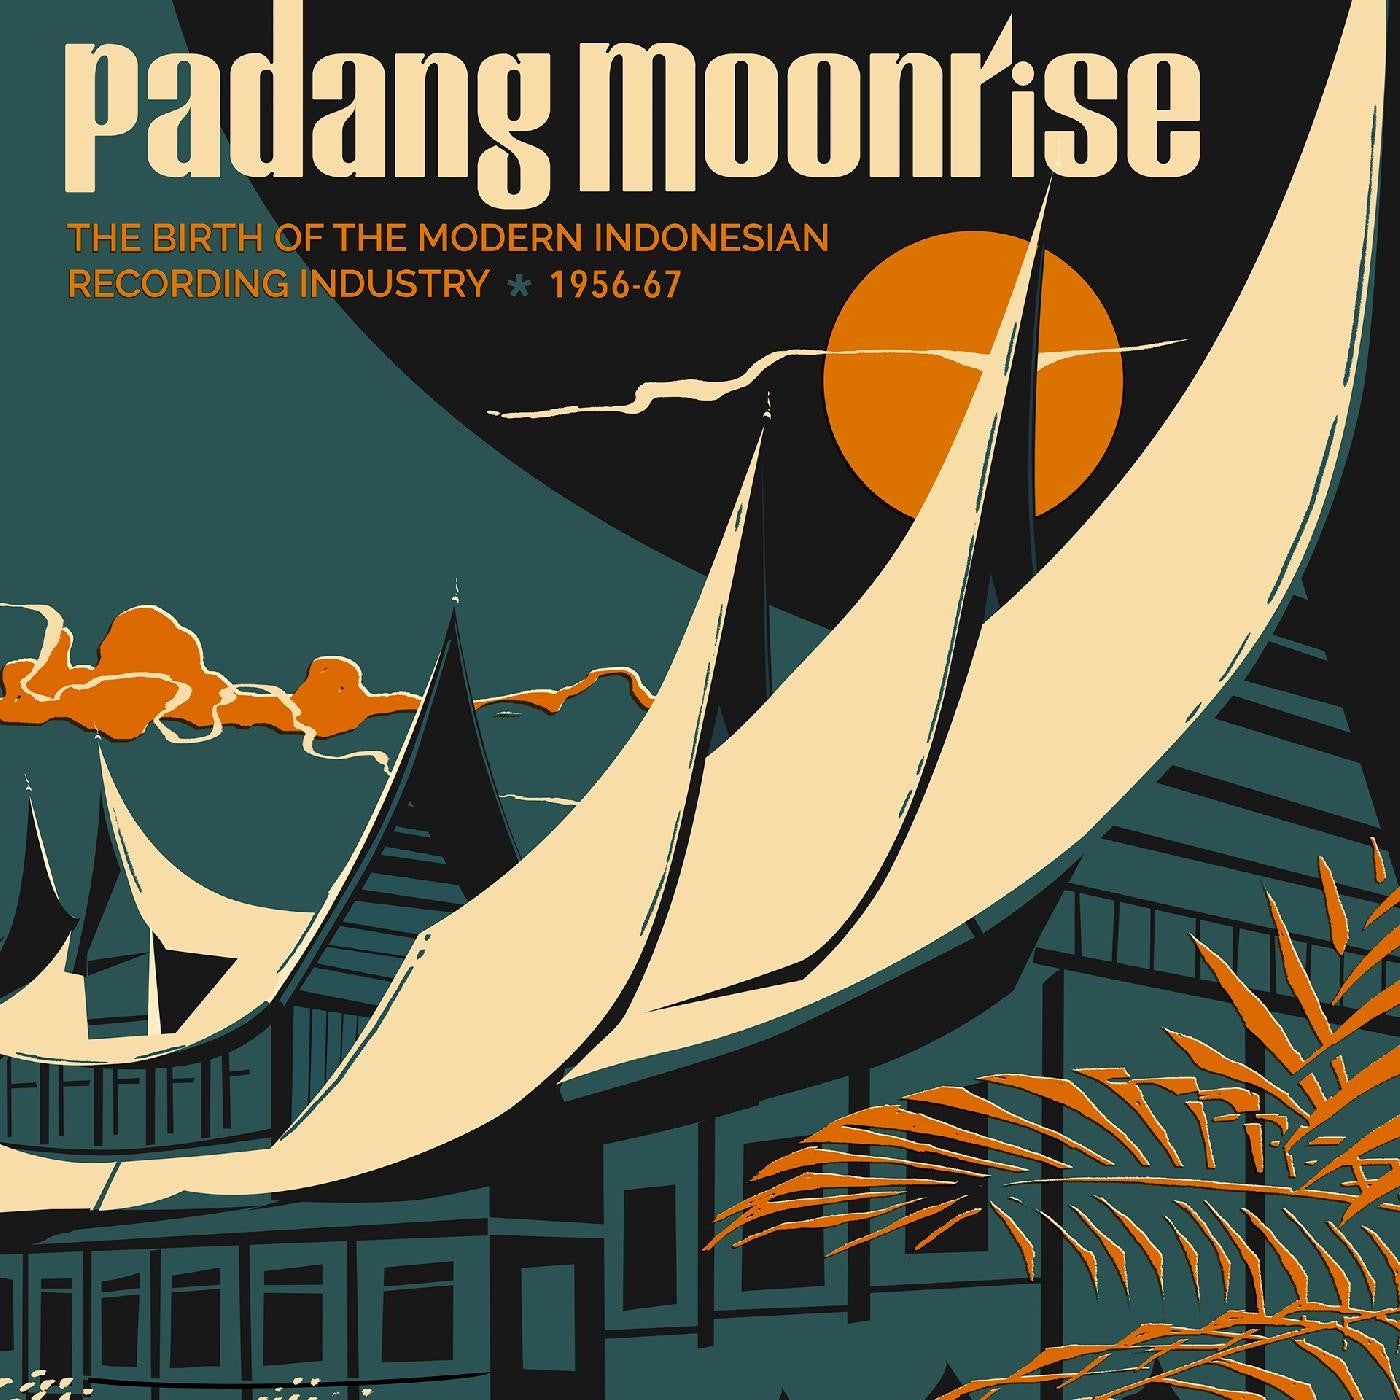 Various – Padang Moonrise (The Birth Of The Modern Indonesian Recording Industry ⋆ 1955-69) - New 2 LP Record 2022 Soundway UK Import Vinyl & 7" Single - International / Indonesian Traditional / Jazz / Soul